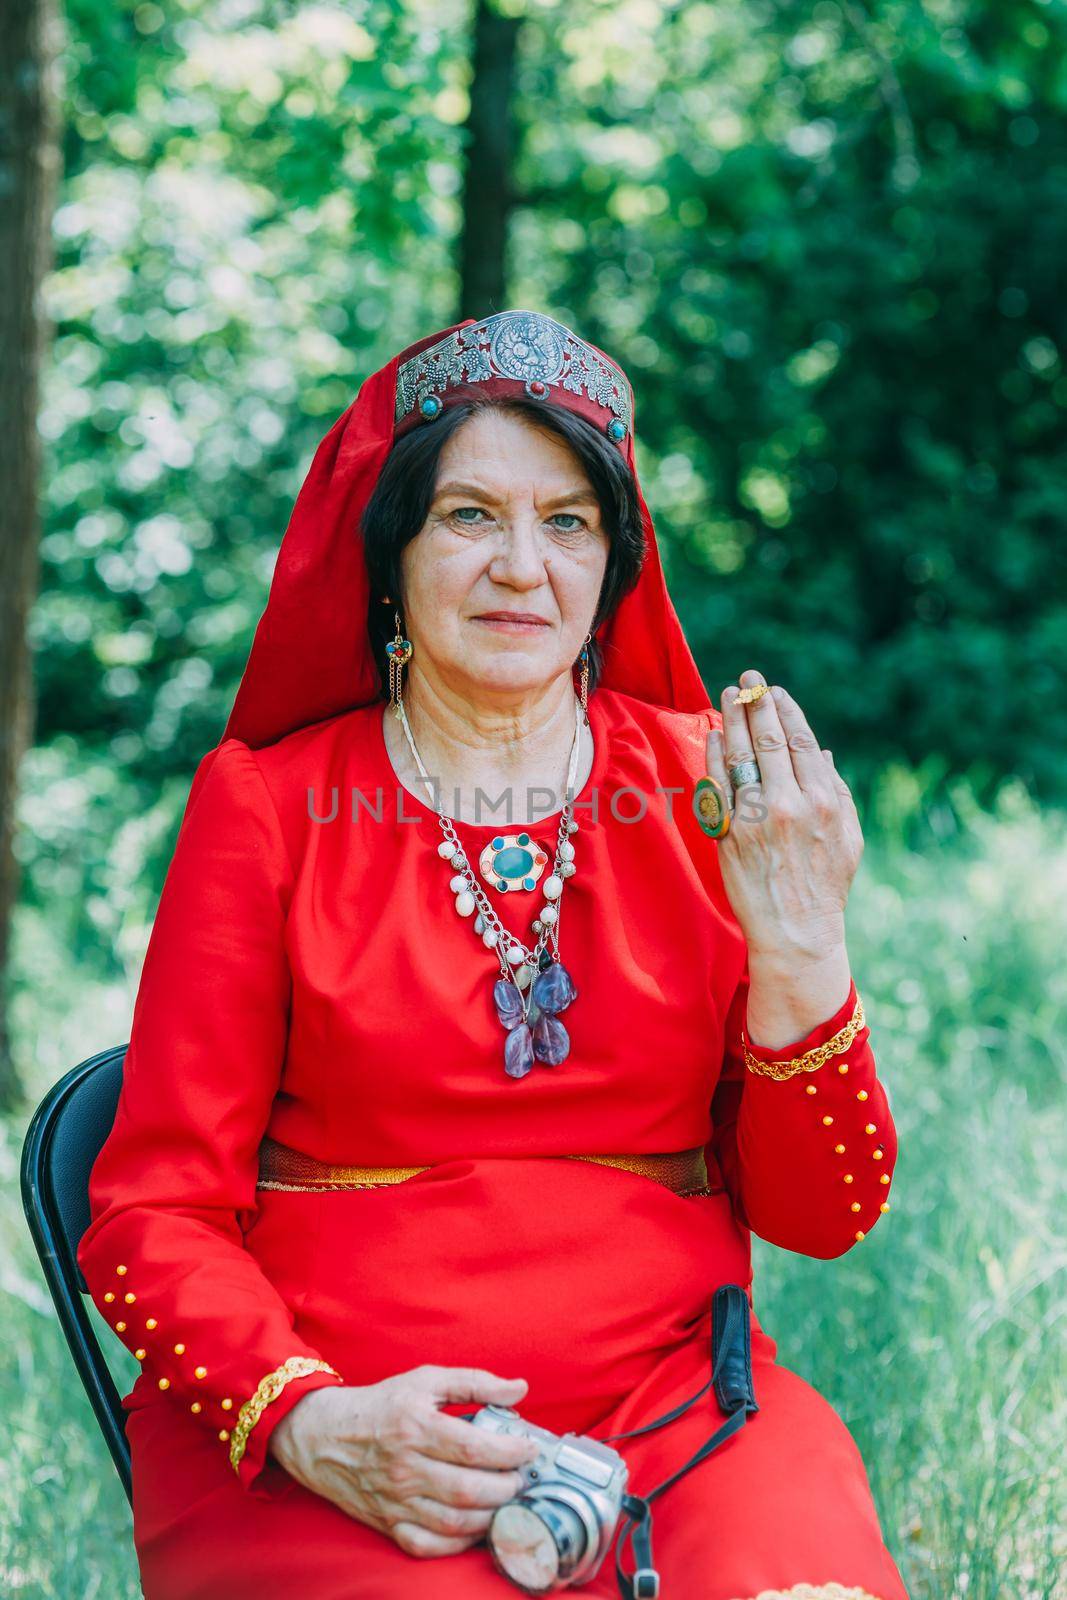 the senior priestess with a butterfly on her fingers prepared for the rite of sacrifice. mystical pagan rite. pagans today